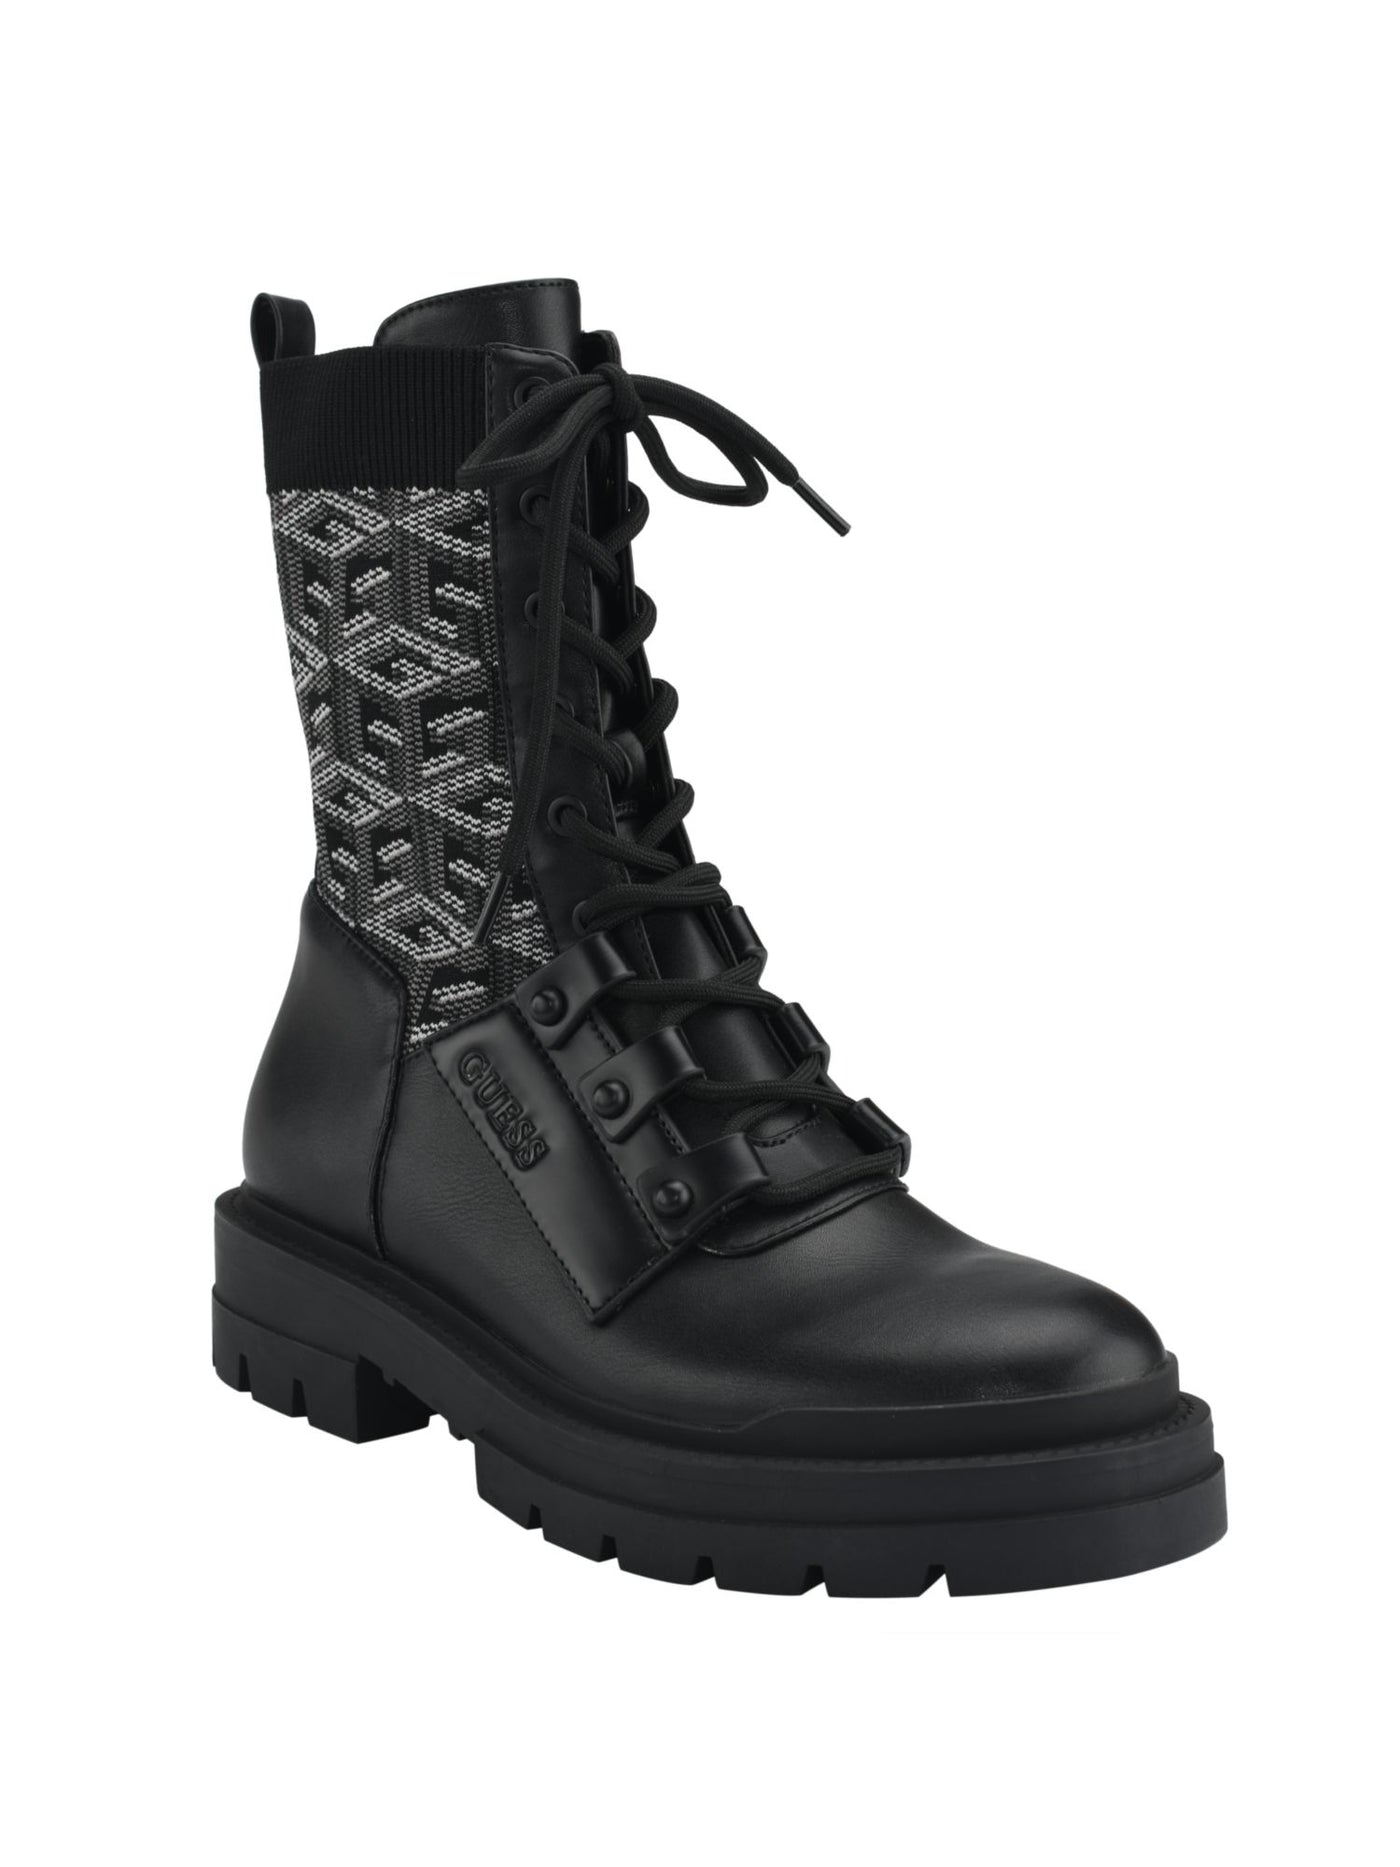 GUESS Womens Black Mixed Media 1" Platform Back Pull-Tab Padded Stretch Odalis Round Toe Block Heel Lace-Up Combat Boots 5.5 M